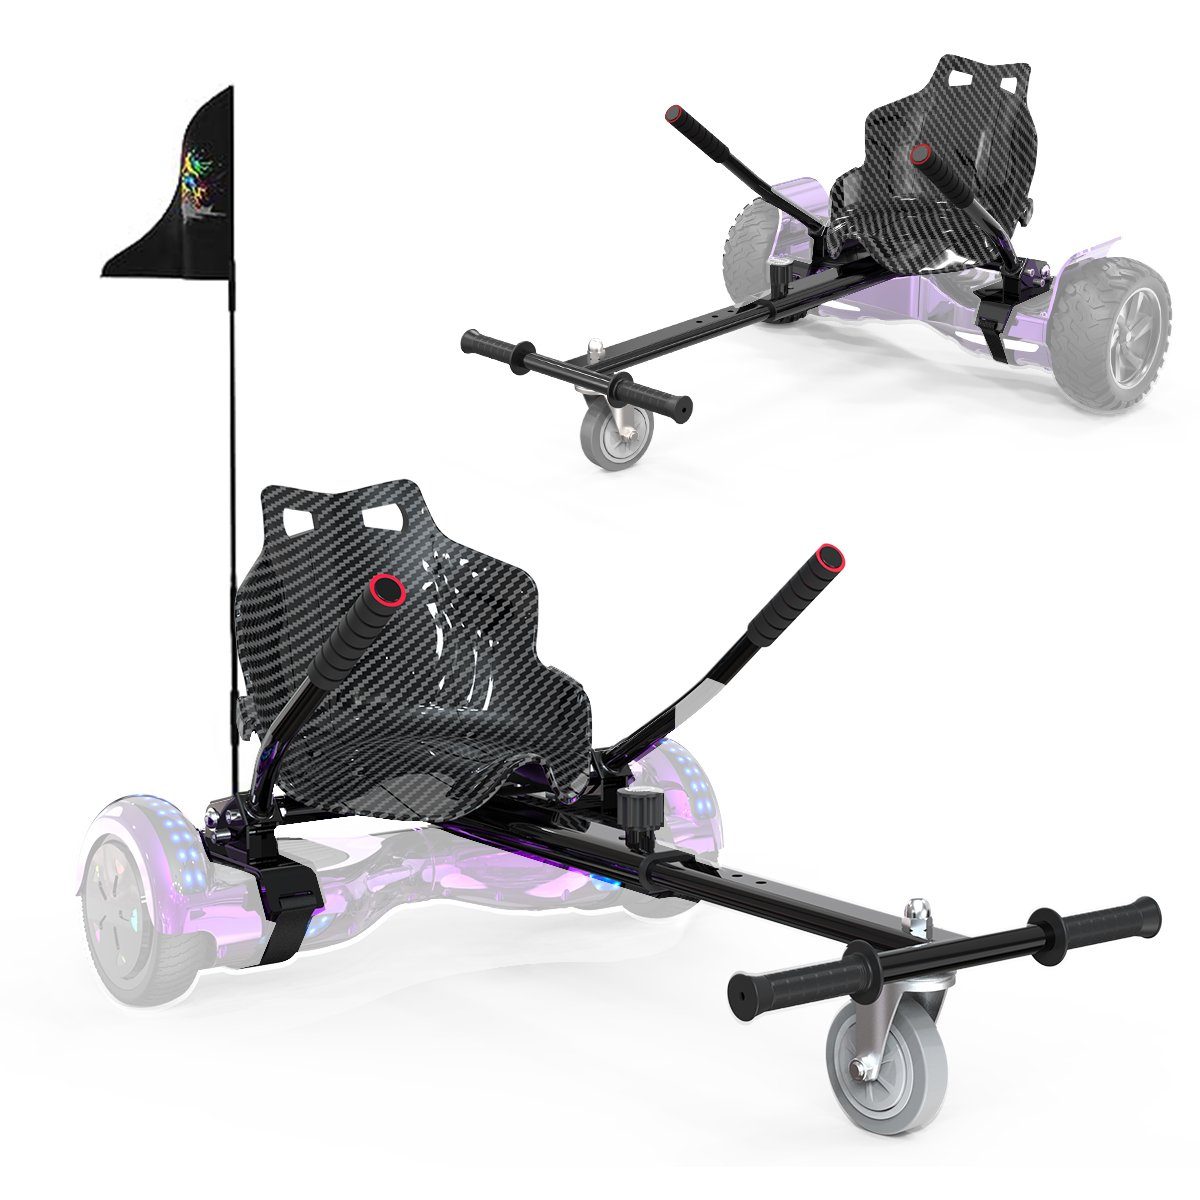 Clanmacy Balance Scooter Kart Hoverboard Sitz Sitzscooter für 6,5, 8,5 und  10 Zoll Hoverboards